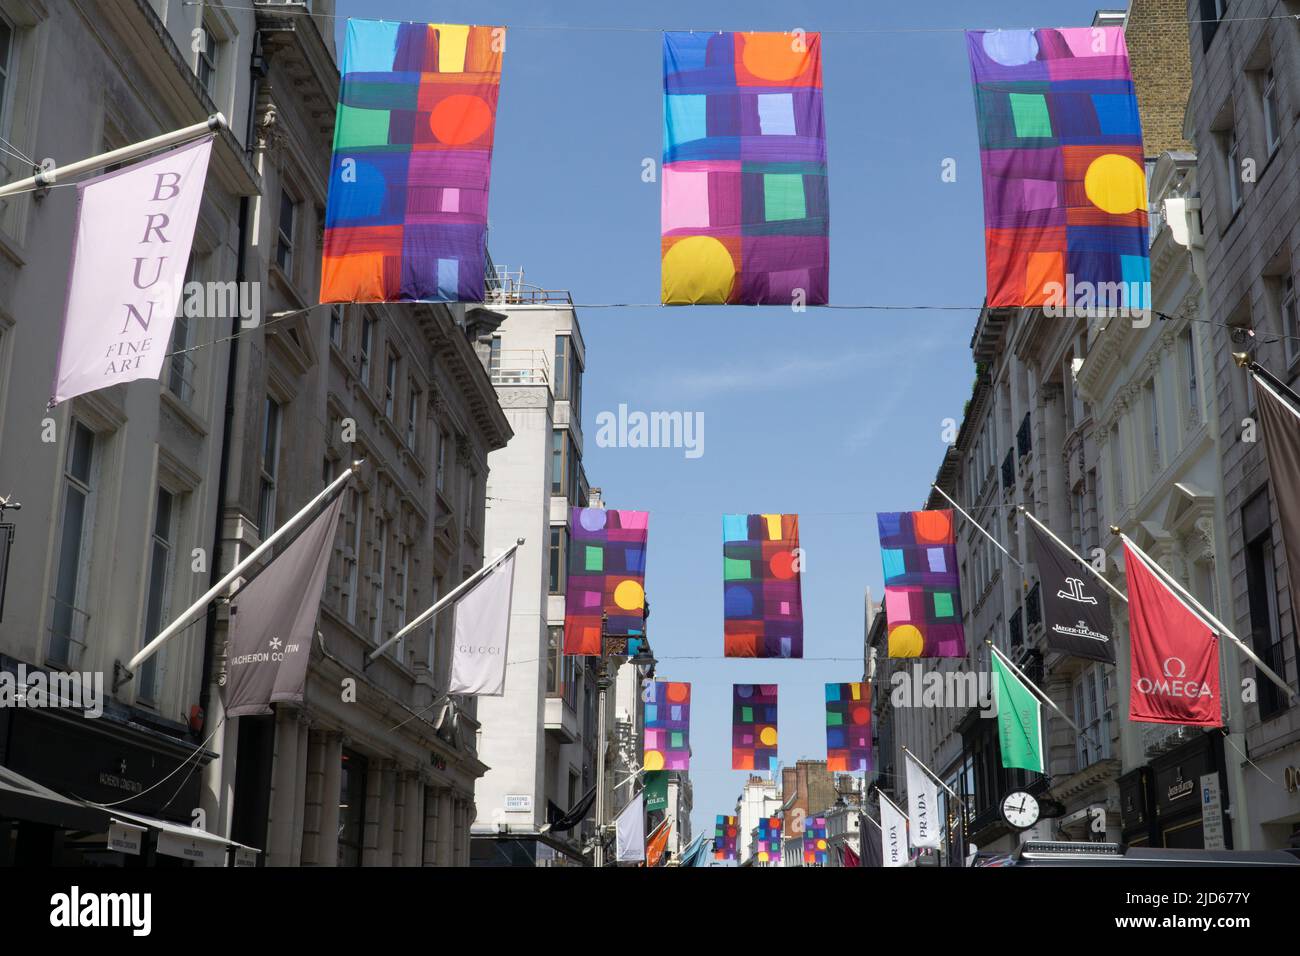 London, UK, 17 June 2021: To coincide with the Royal Academy's annual Summer Exhibition, flags with 11 different designs by Welsh artist Mali Morris RA are suspended above Old Bond Street. Anna Watson/Alamy Live News Stock Photo